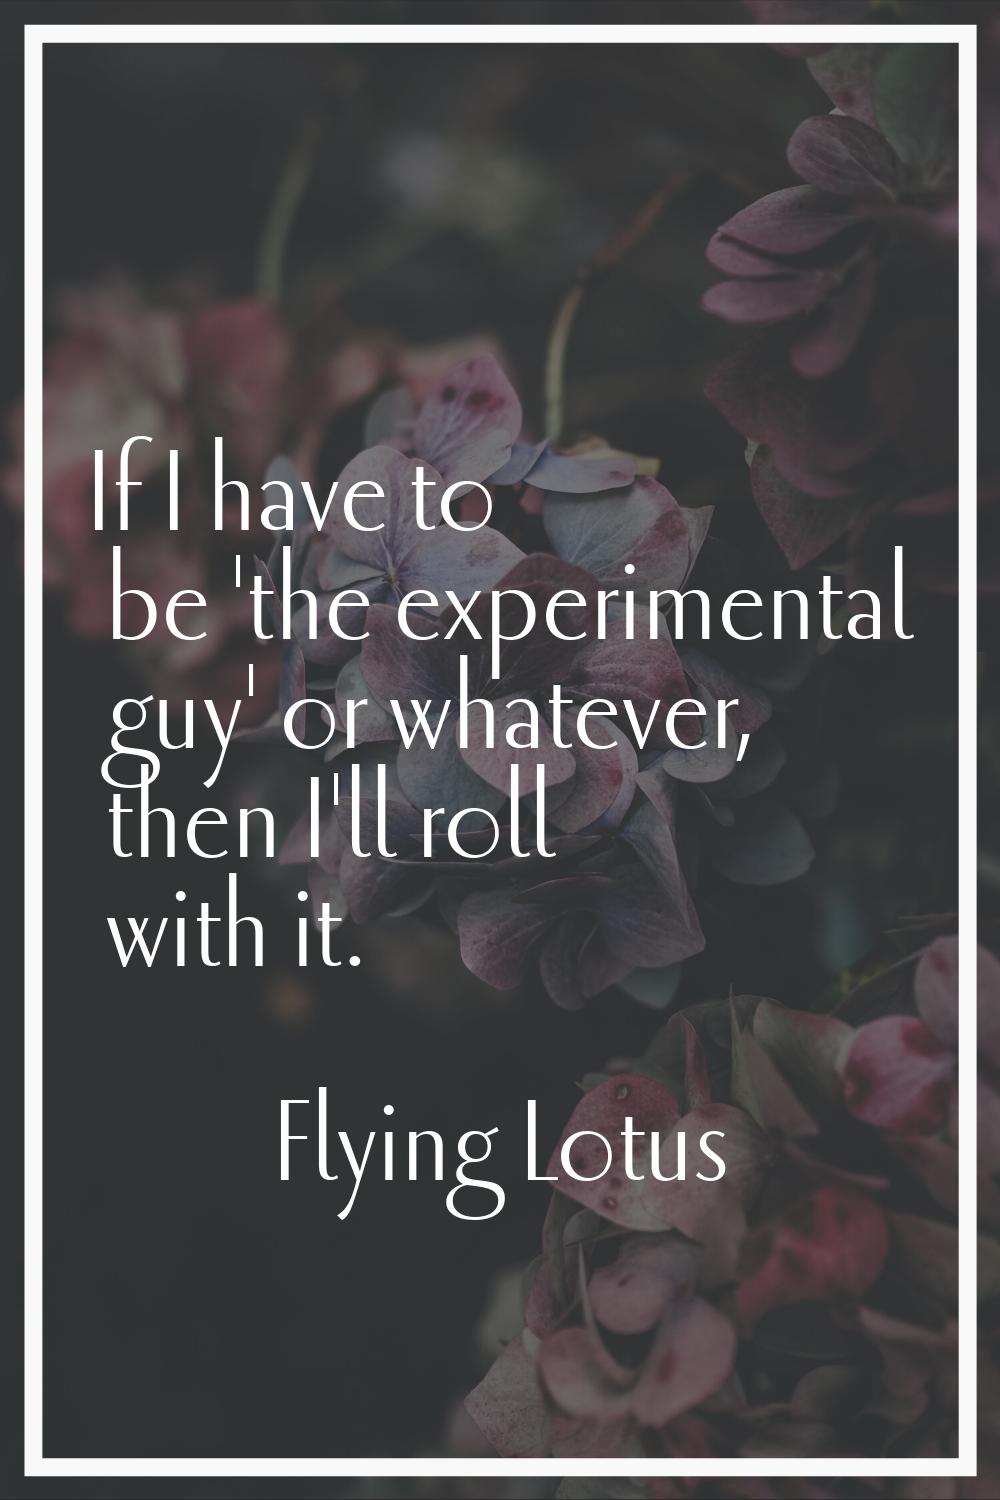 If I have to be 'the experimental guy' or whatever, then I'll roll with it.